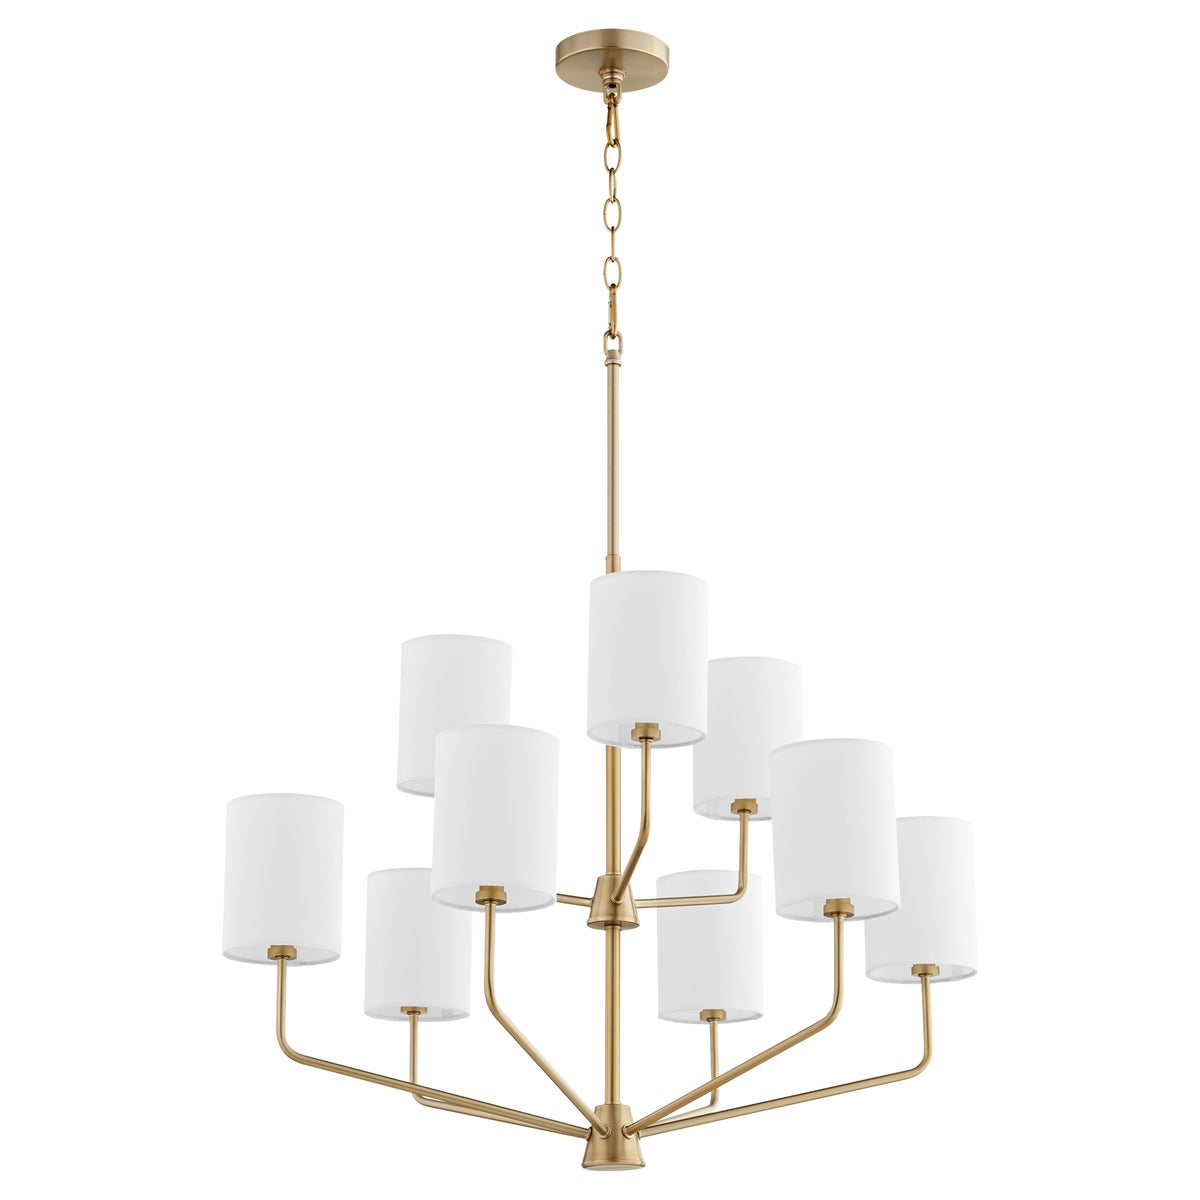 Brass Chandelier with white lampshades, rounded angles, and bold lines. Perfect for kitchens, dining rooms, living rooms, or entry foyers. 9 bulbs, 60W, dimmable. UL Listed, 2-year warranty.